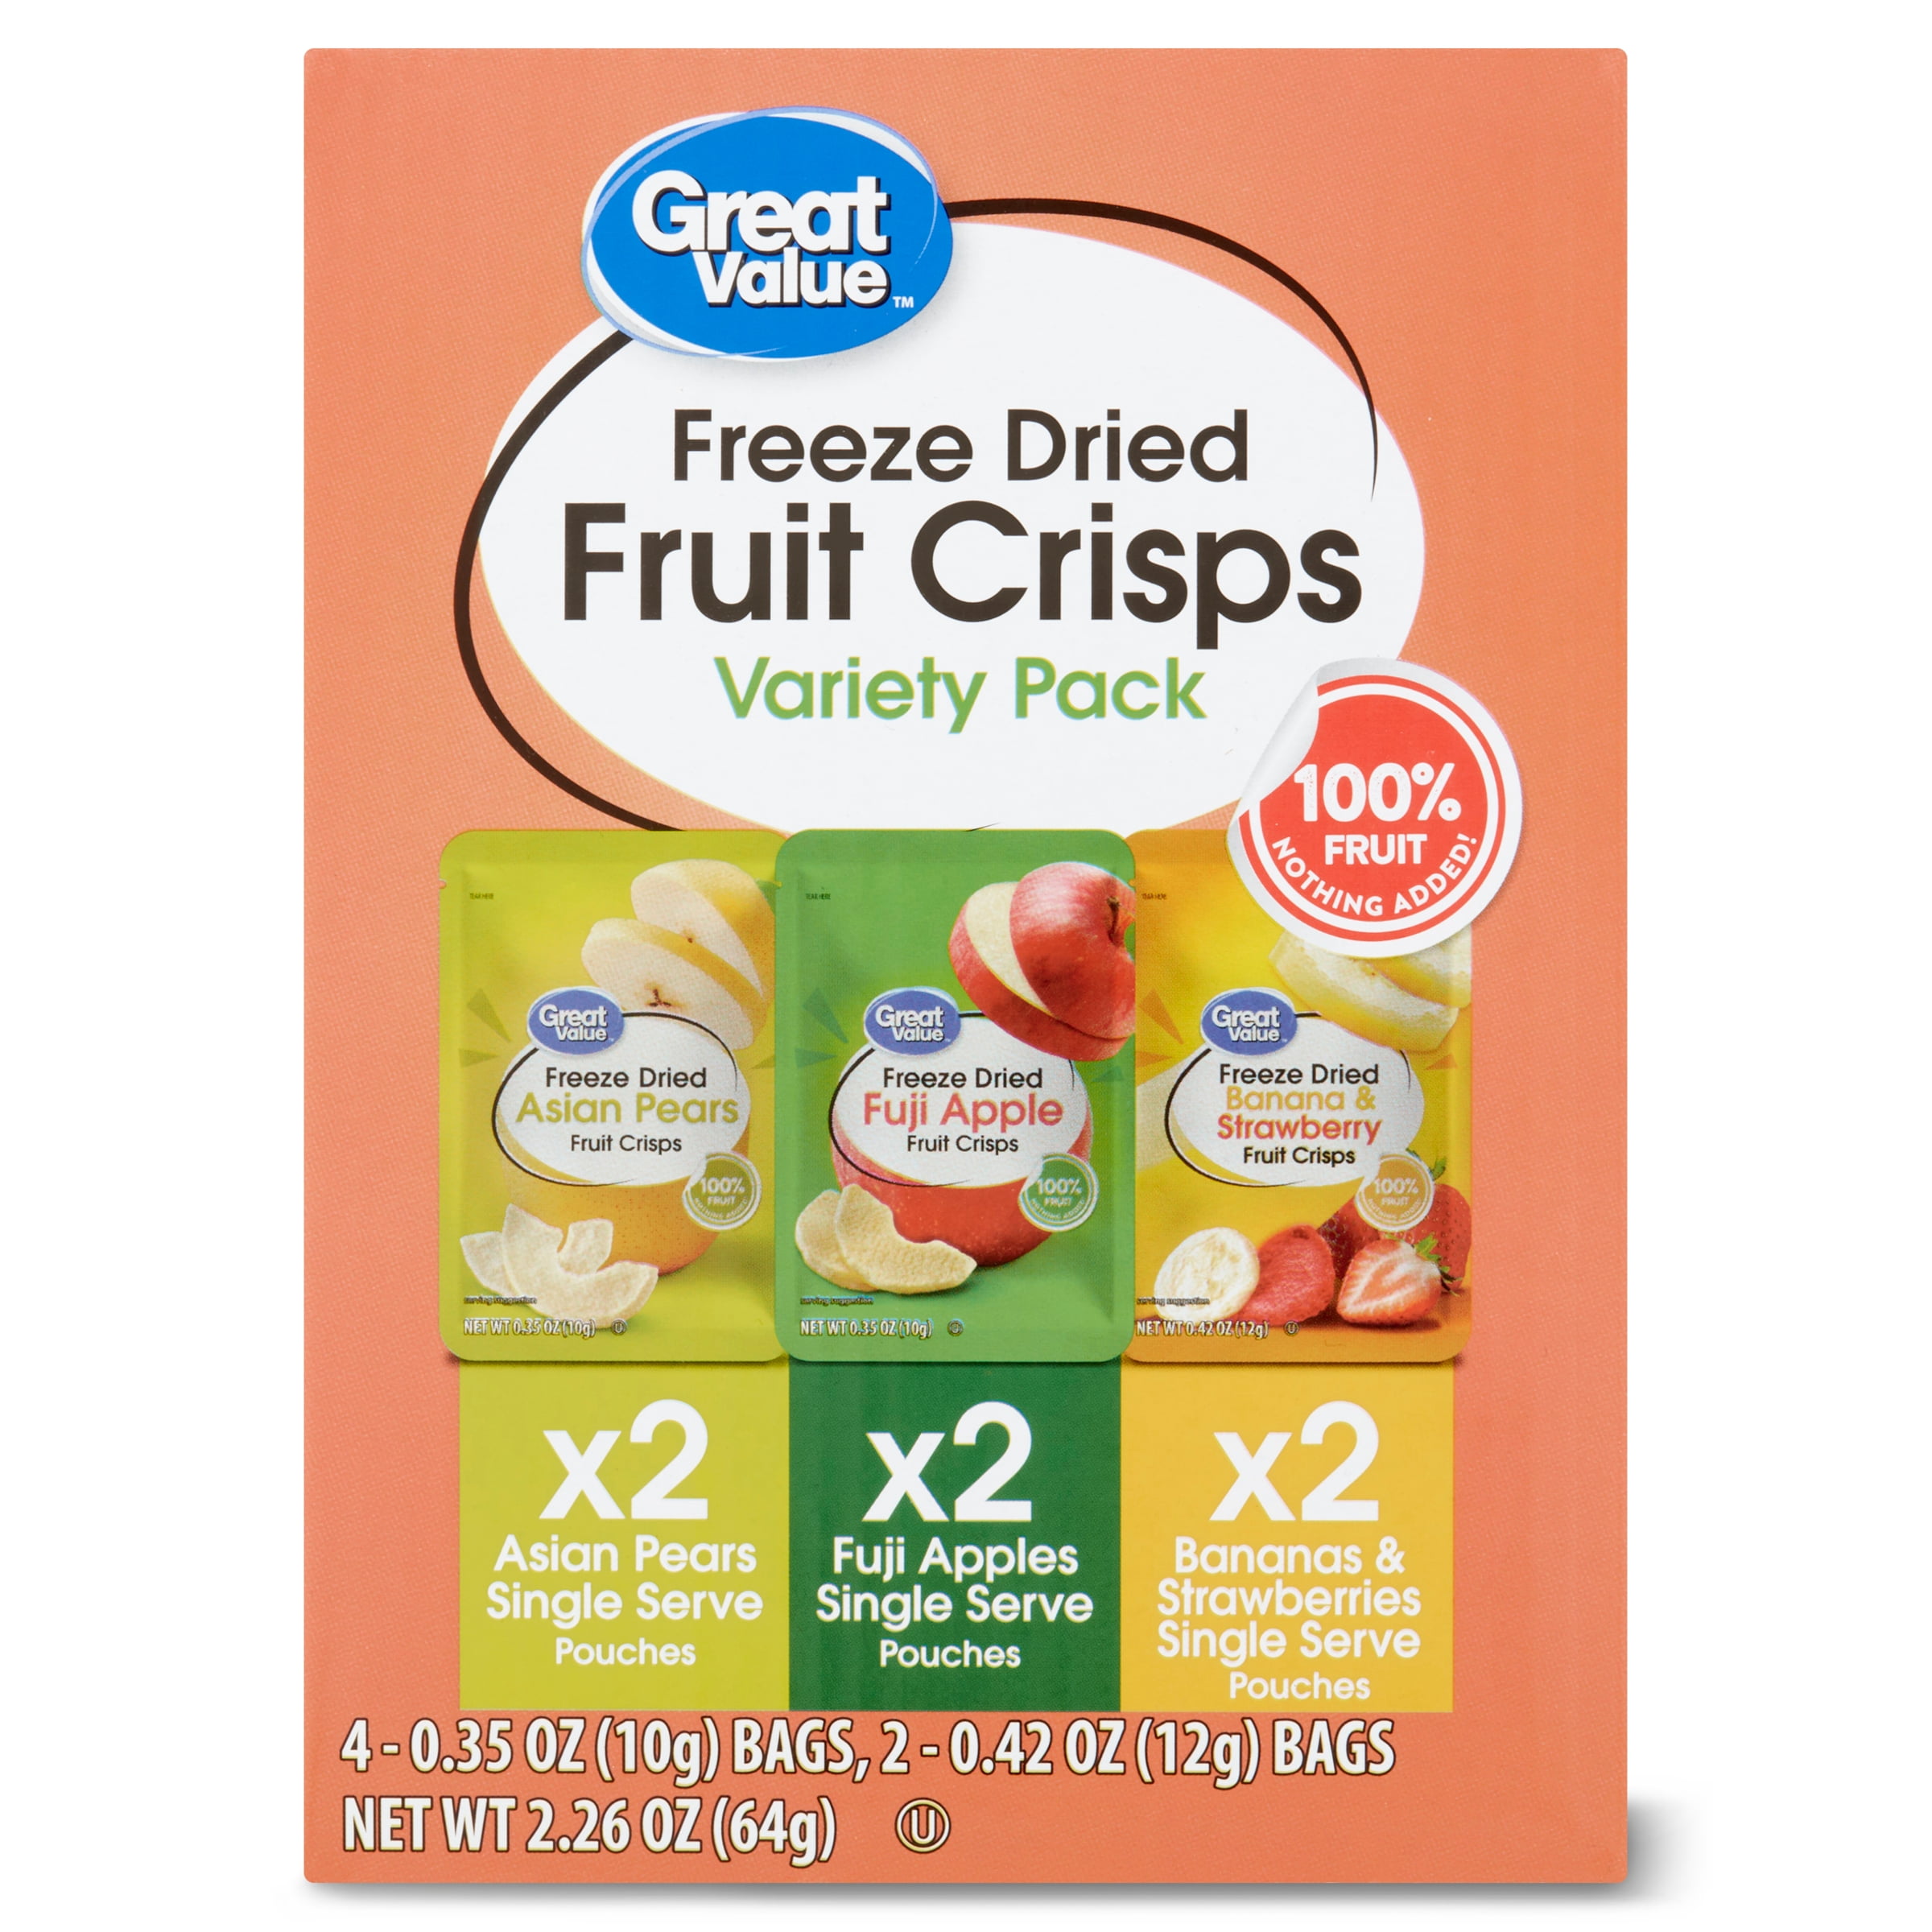 Great Value Freeze Dried Fruit Crisps, Variety Pack, 6 Count, 2.26 oz.